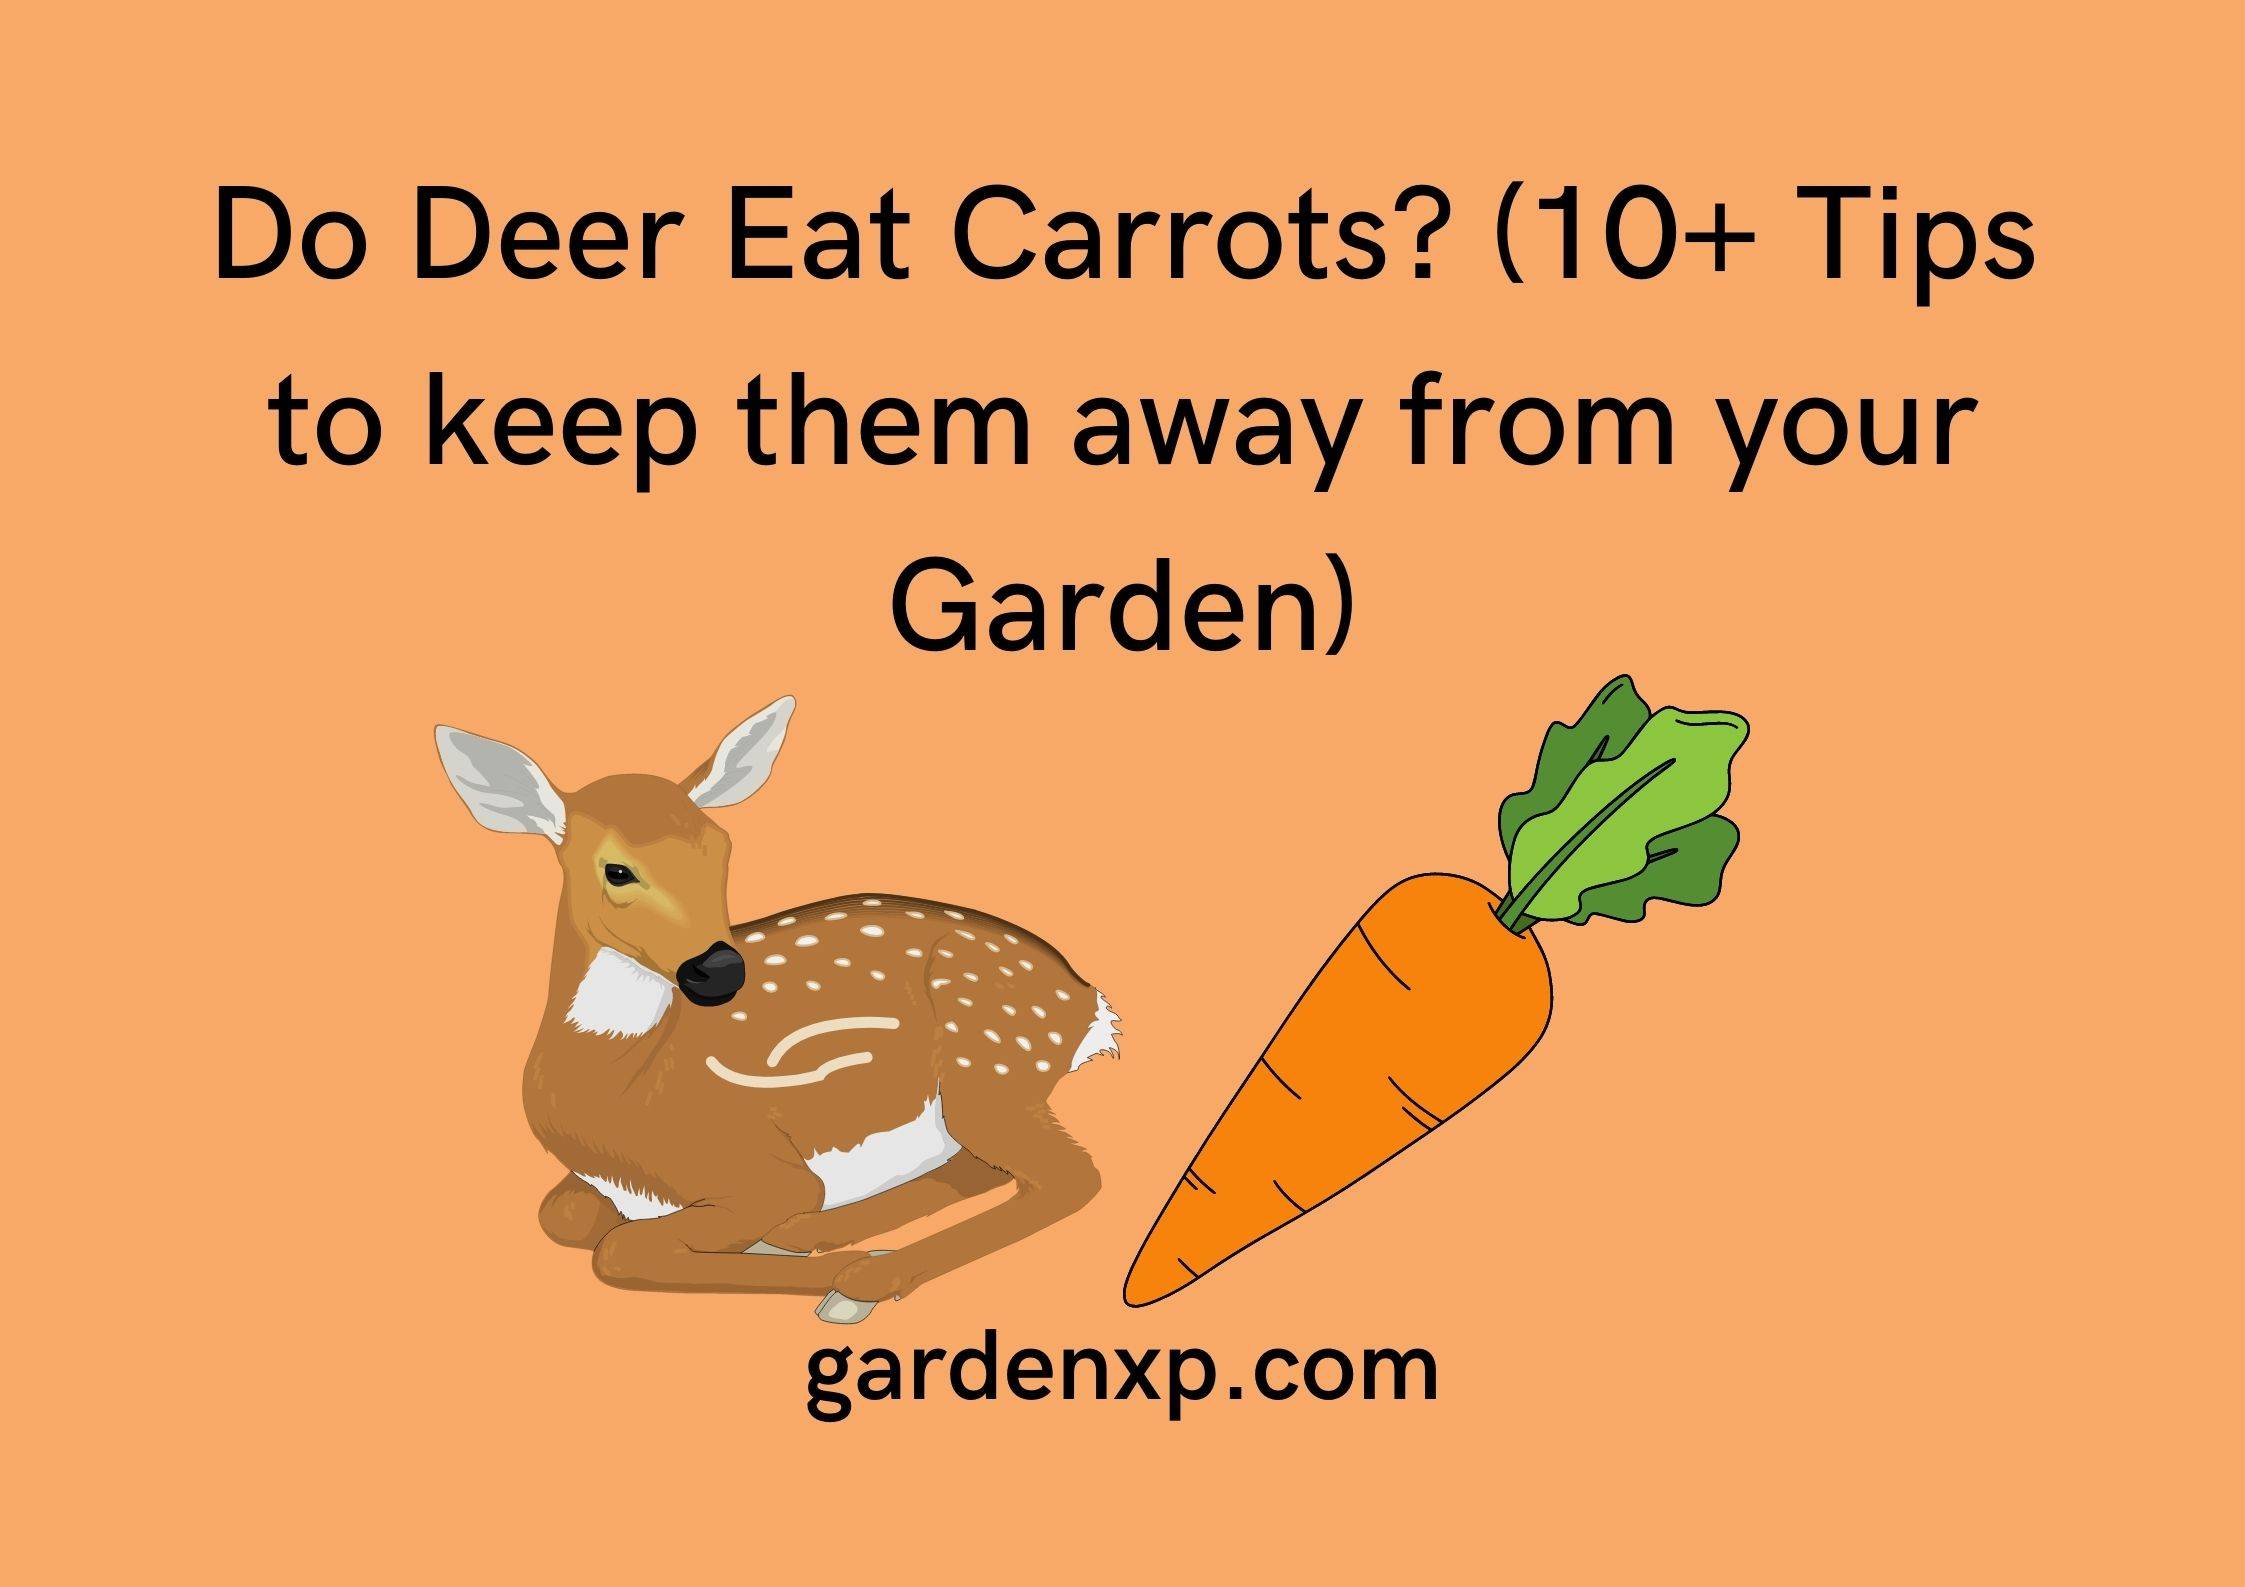 Do Deer Eat Carrots? (10+ Tips to keep them away from your Garden)